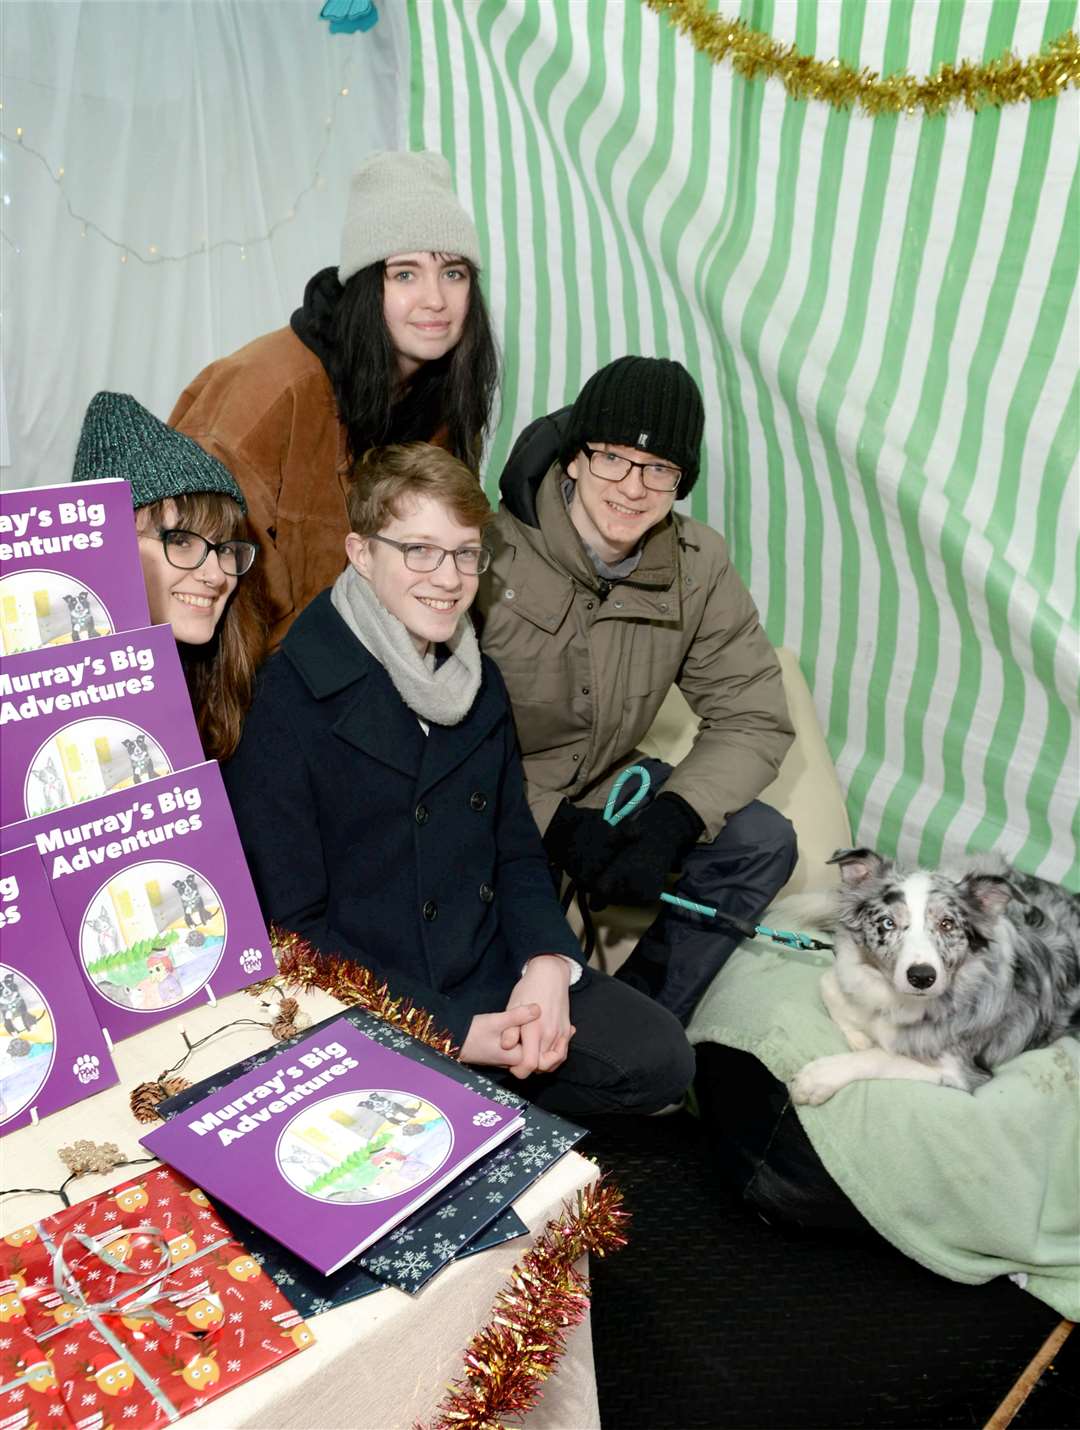 Laura Sutherland, Brogan Hunter, Liam Young and Keelan Harvey from Fortrose Academy were selling Murray's Big Adventure books at their stall with the support of Murray the dog.